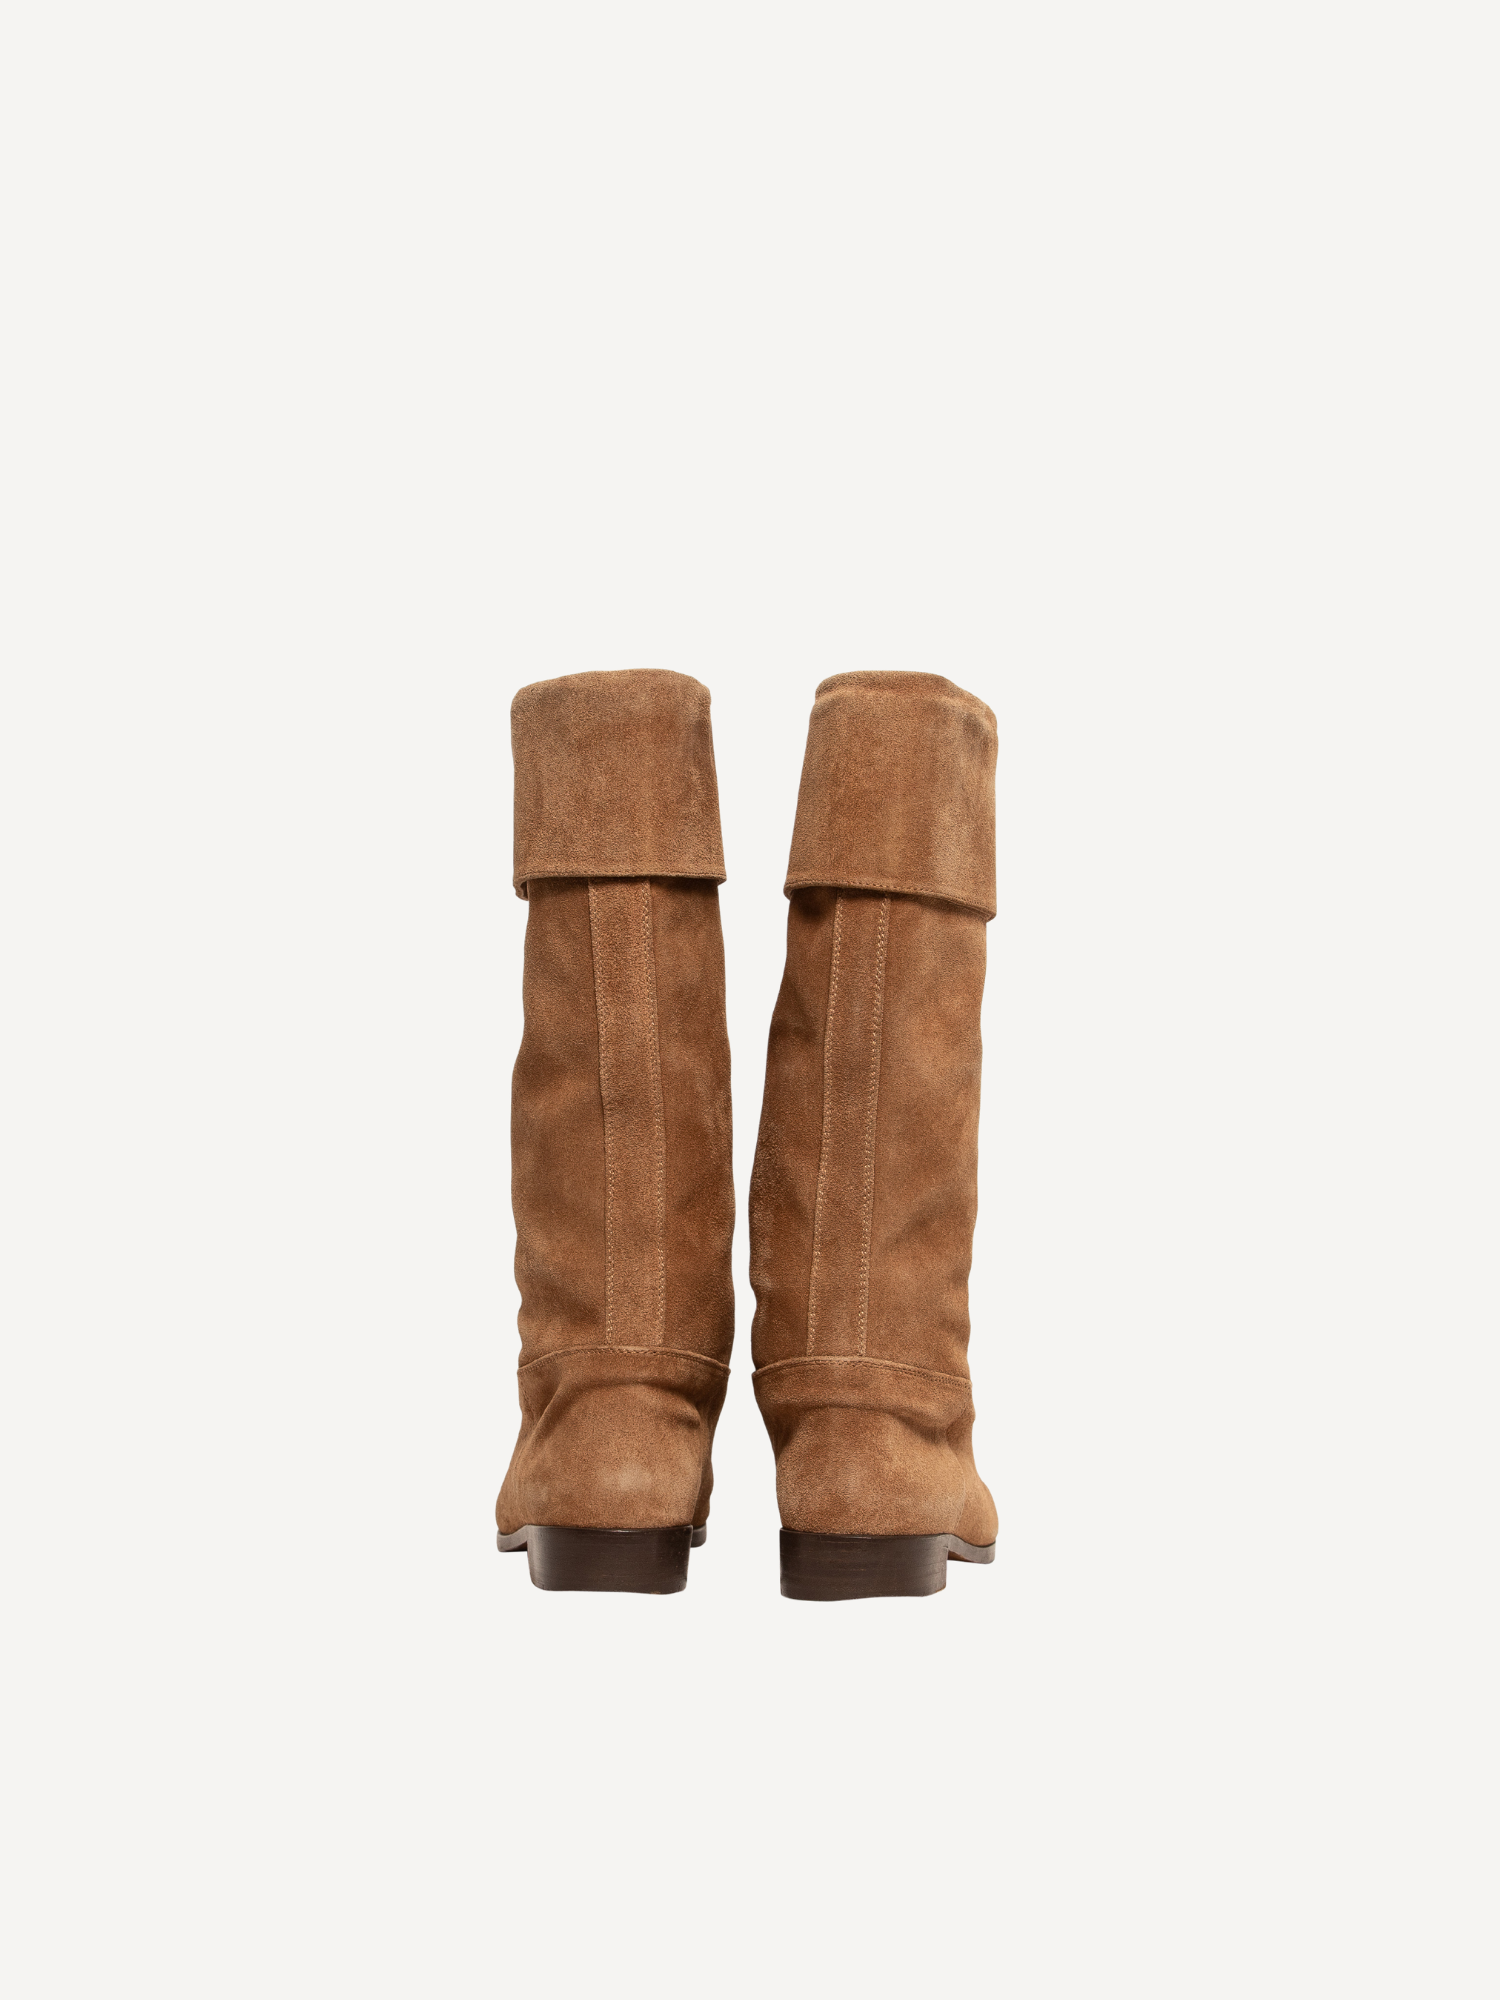 Chanel Turnlock Suede Leather Riding Tall Boots